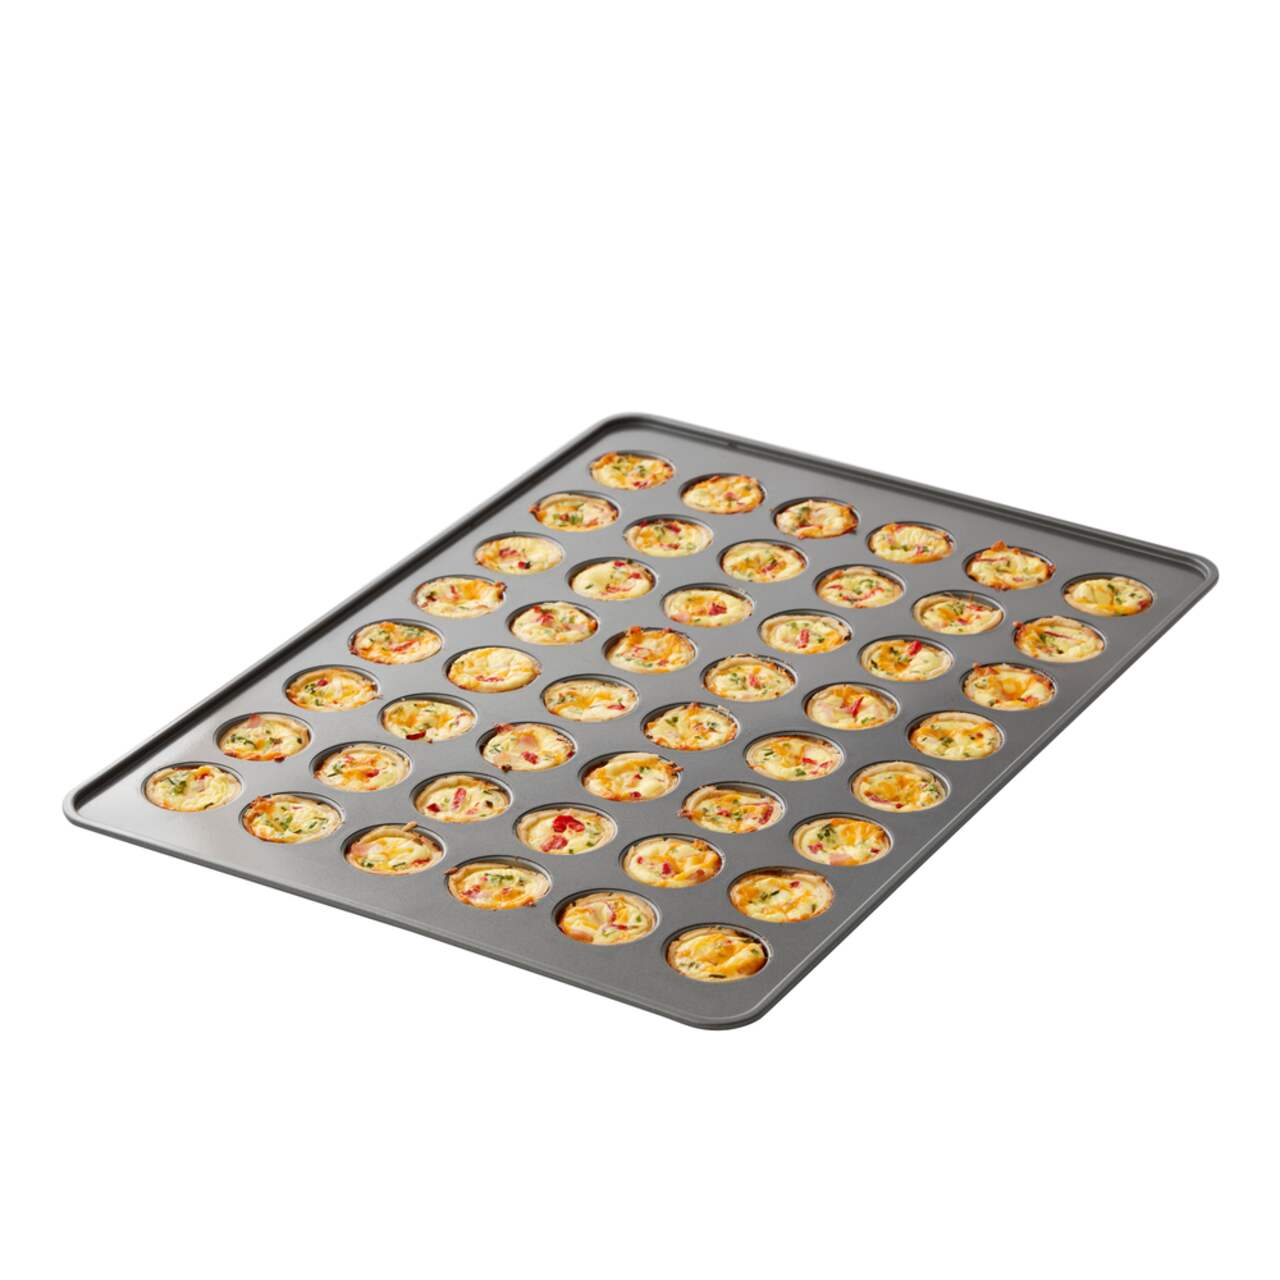 https://media-www.canadiantire.ca/product/living/kitchen/bakeware-baking-prep/1429067/wilton-mega-48-cup-mini-muffin-pan-06836822-771a-4d43-bb0c-36c29d4854b8.png?imdensity=1&imwidth=1244&impolicy=mZoom